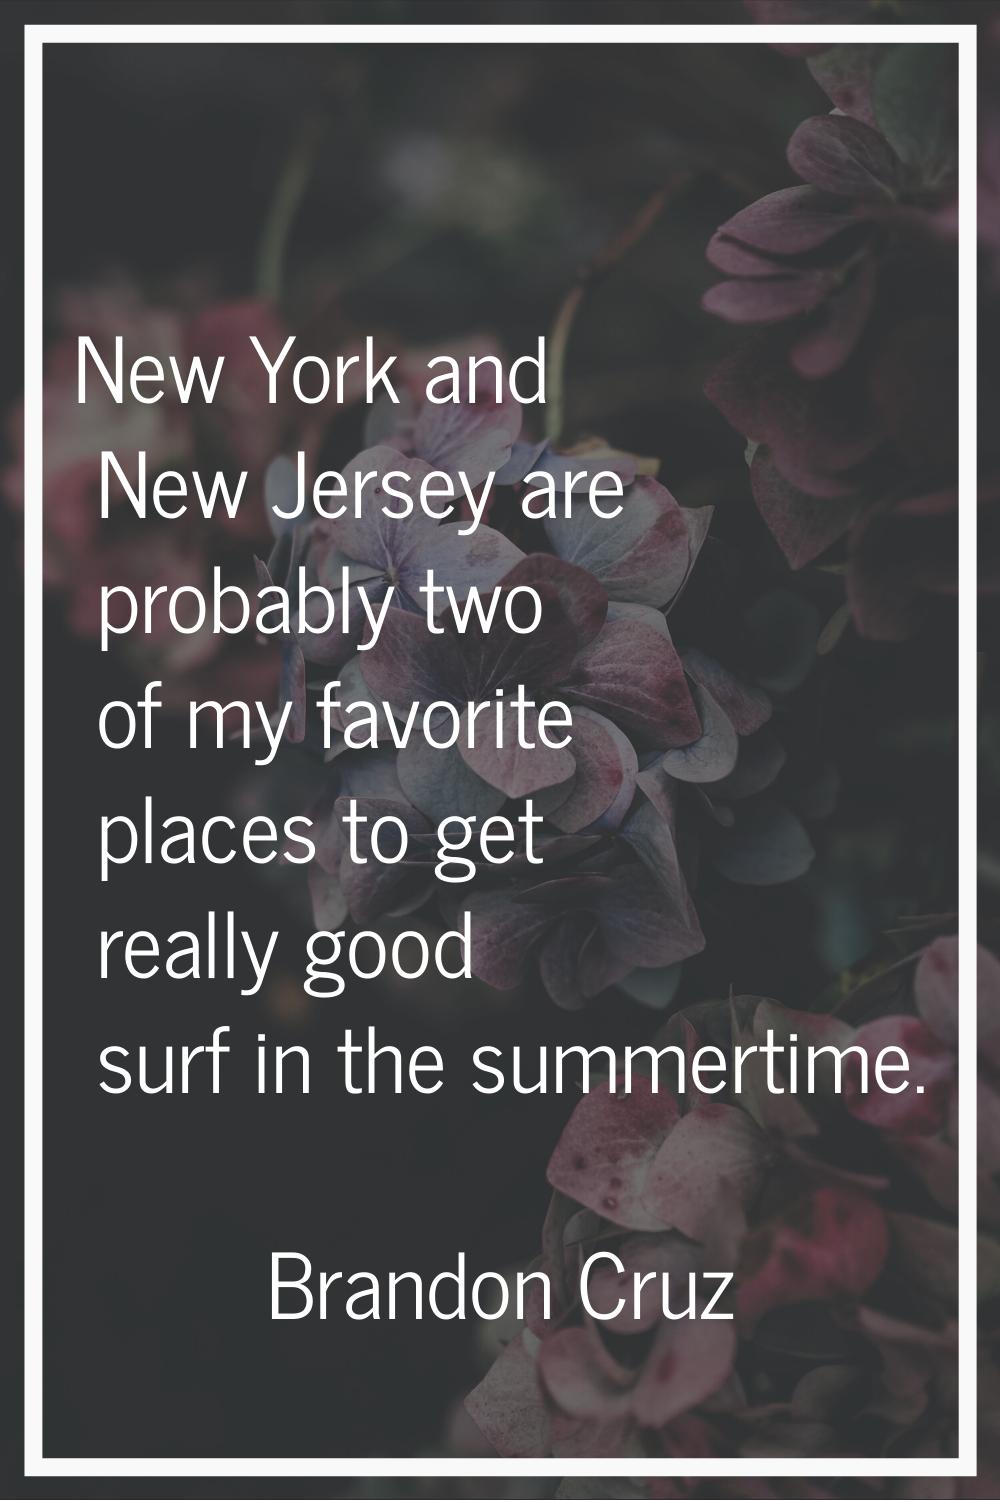 New York and New Jersey are probably two of my favorite places to get really good surf in the summe